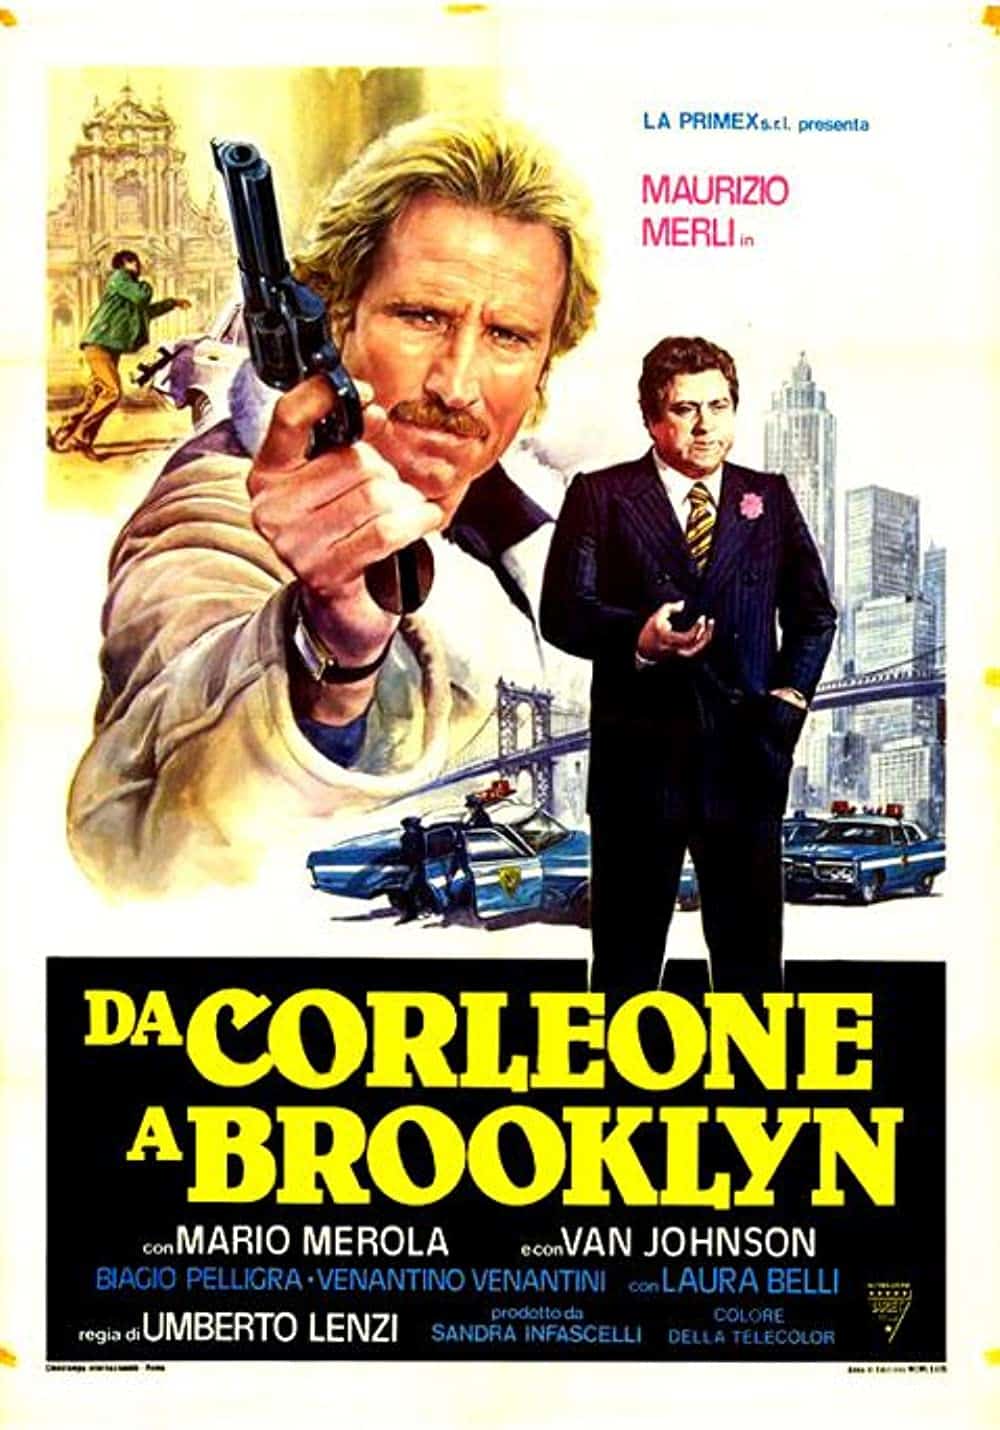 From Corleone to Brooklyn (1979) Best Italian Mafia Movies to Add in Your Watchlist